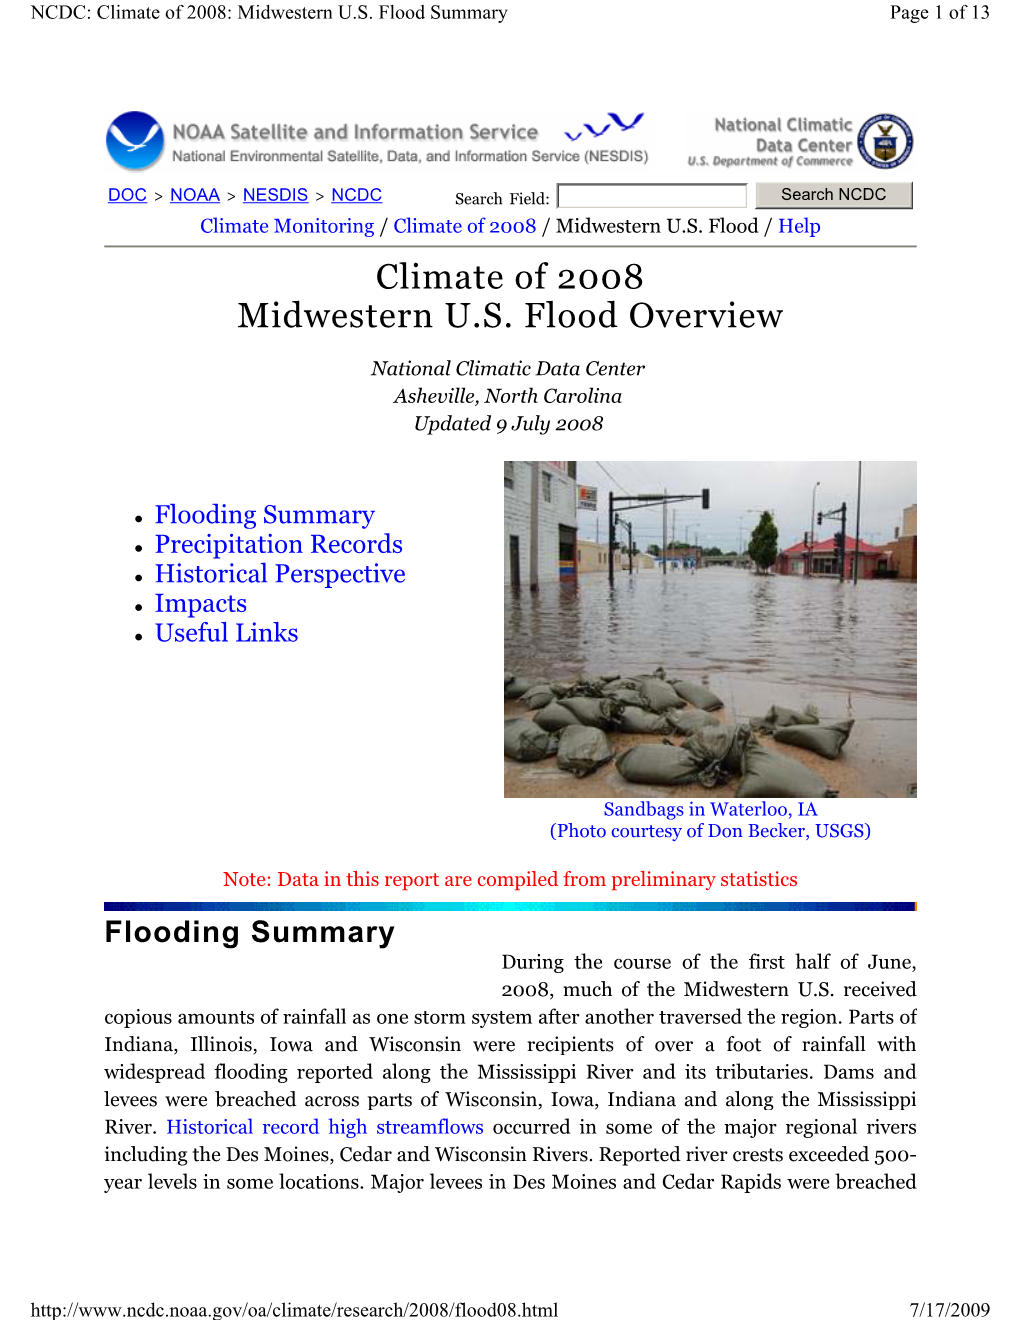 National Climatic Data Center, 2008, Climate of 2008 Midwestern U.S. Flood Overview, July 9 (Accessed May 8, 2009)